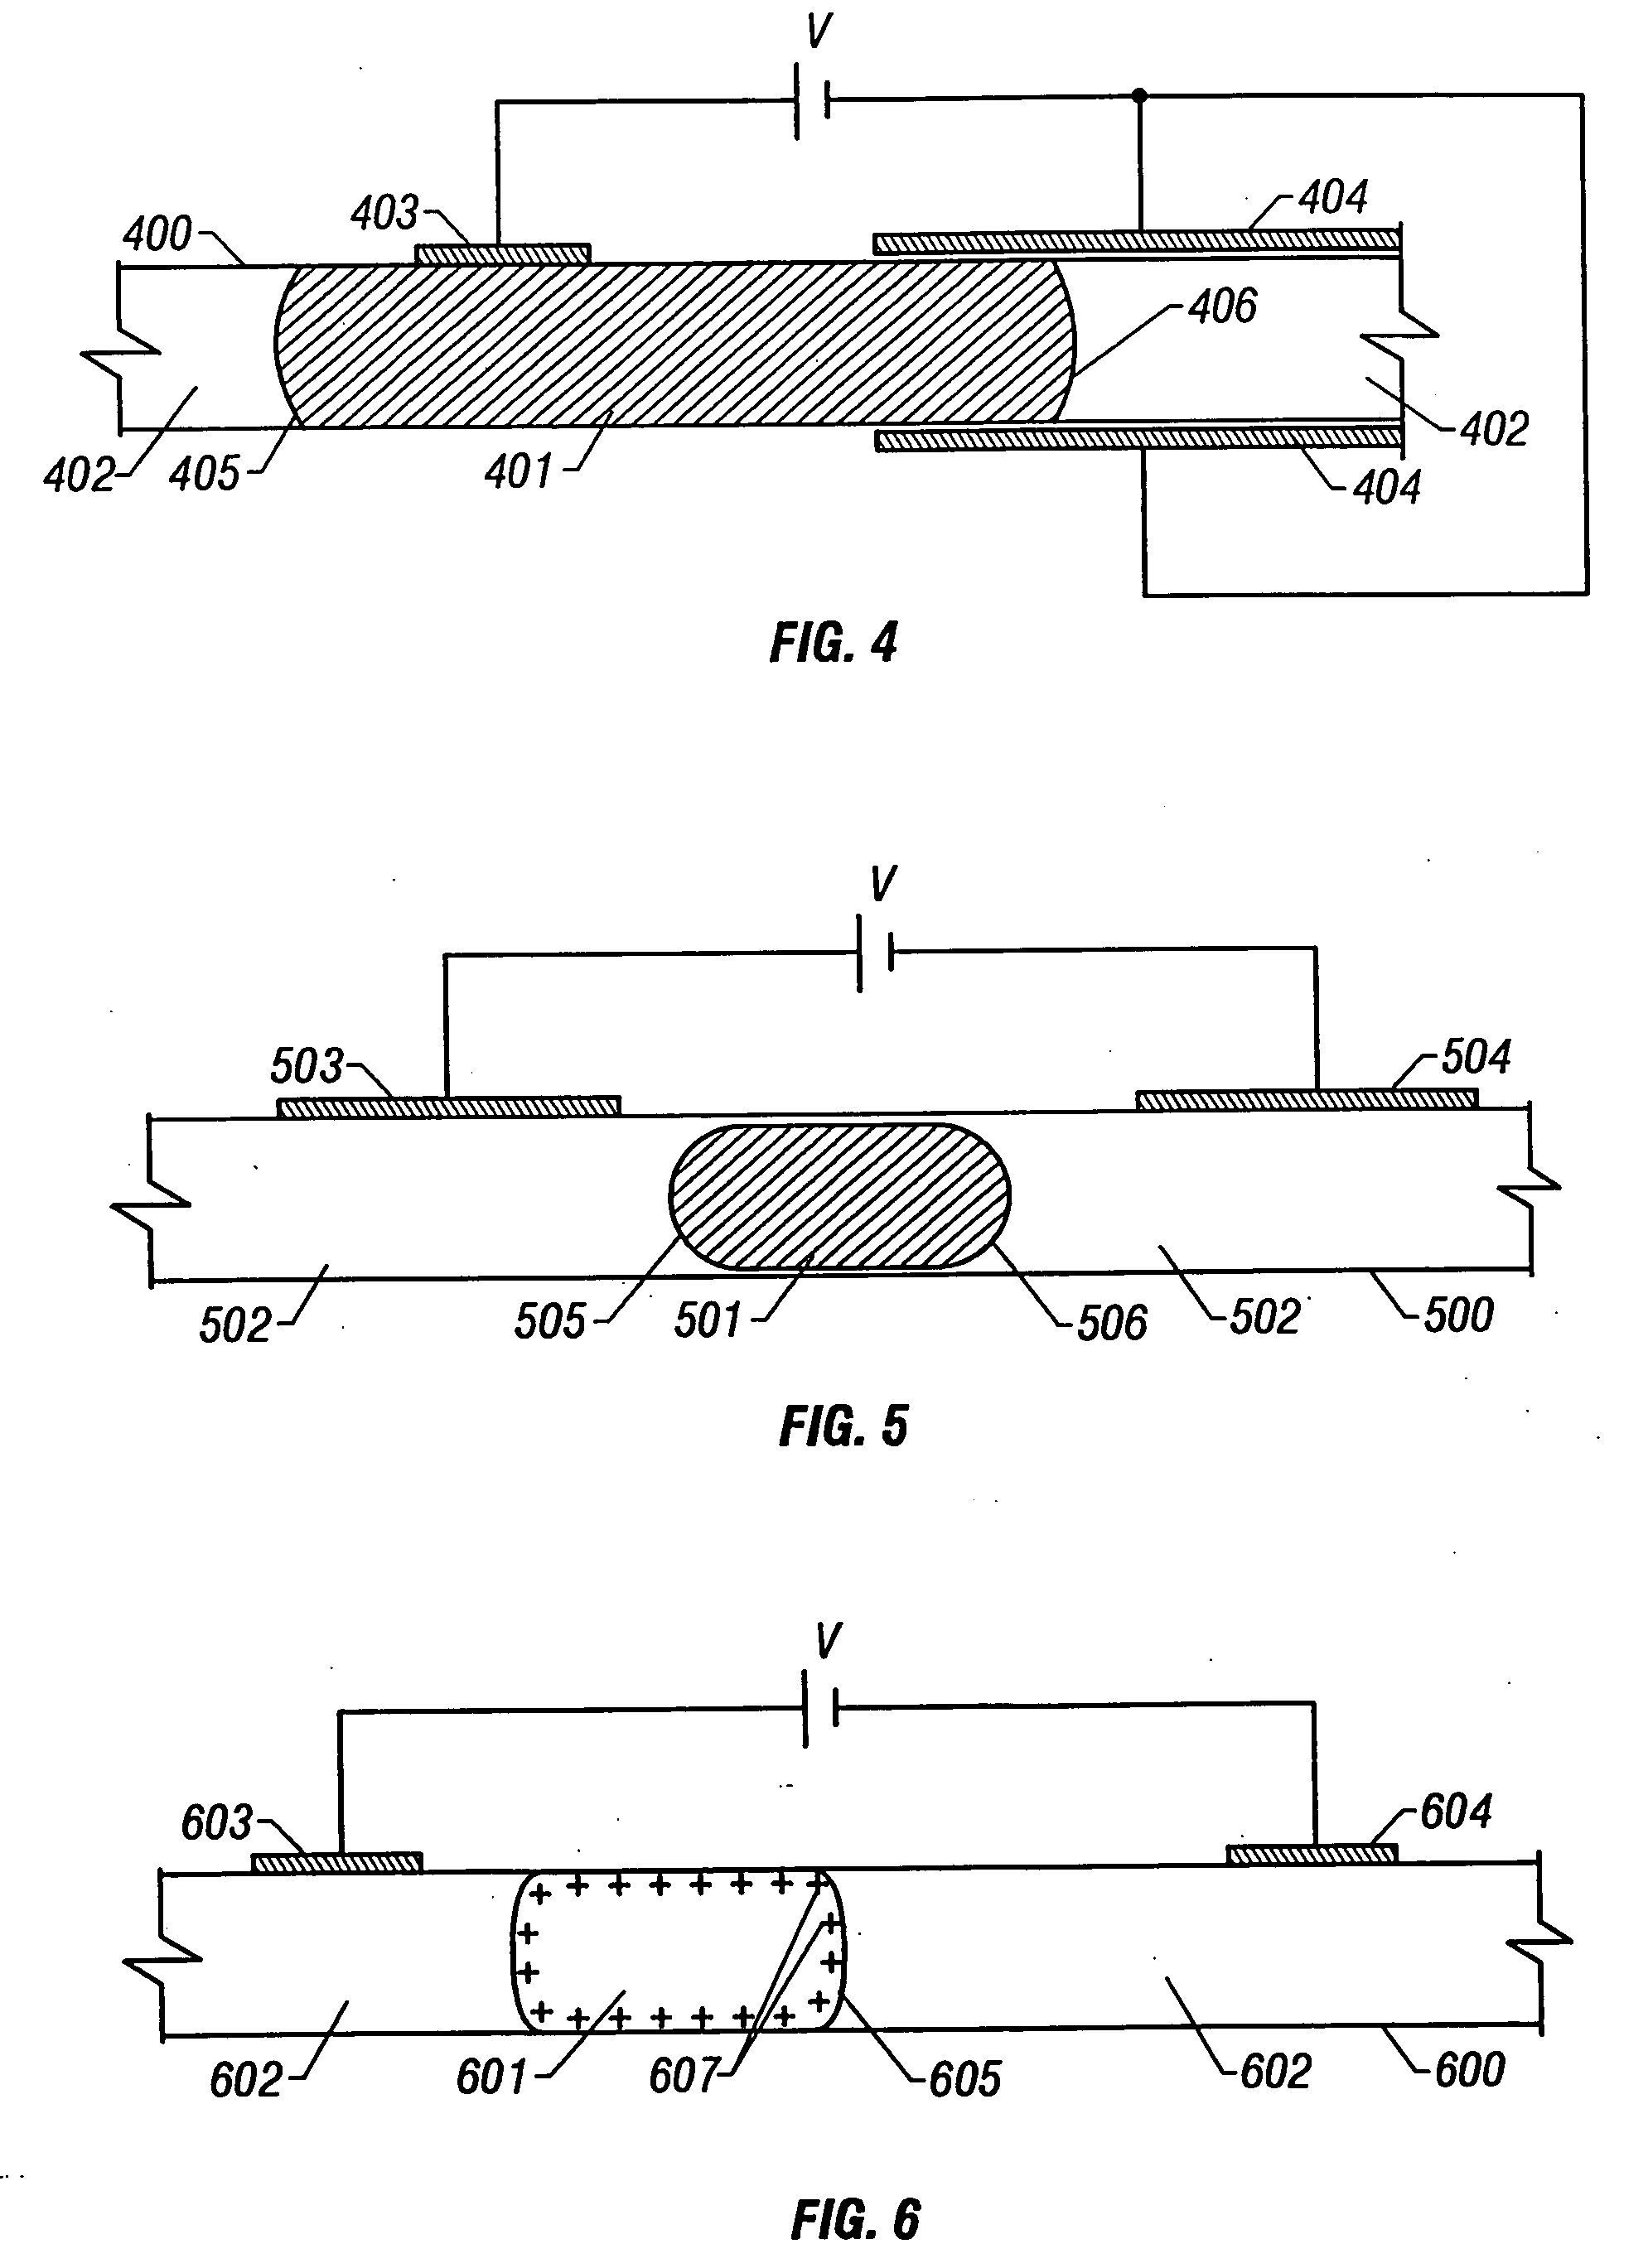 Microfluidic control for waveguide optical switches, variable attenuators, and other optical devices